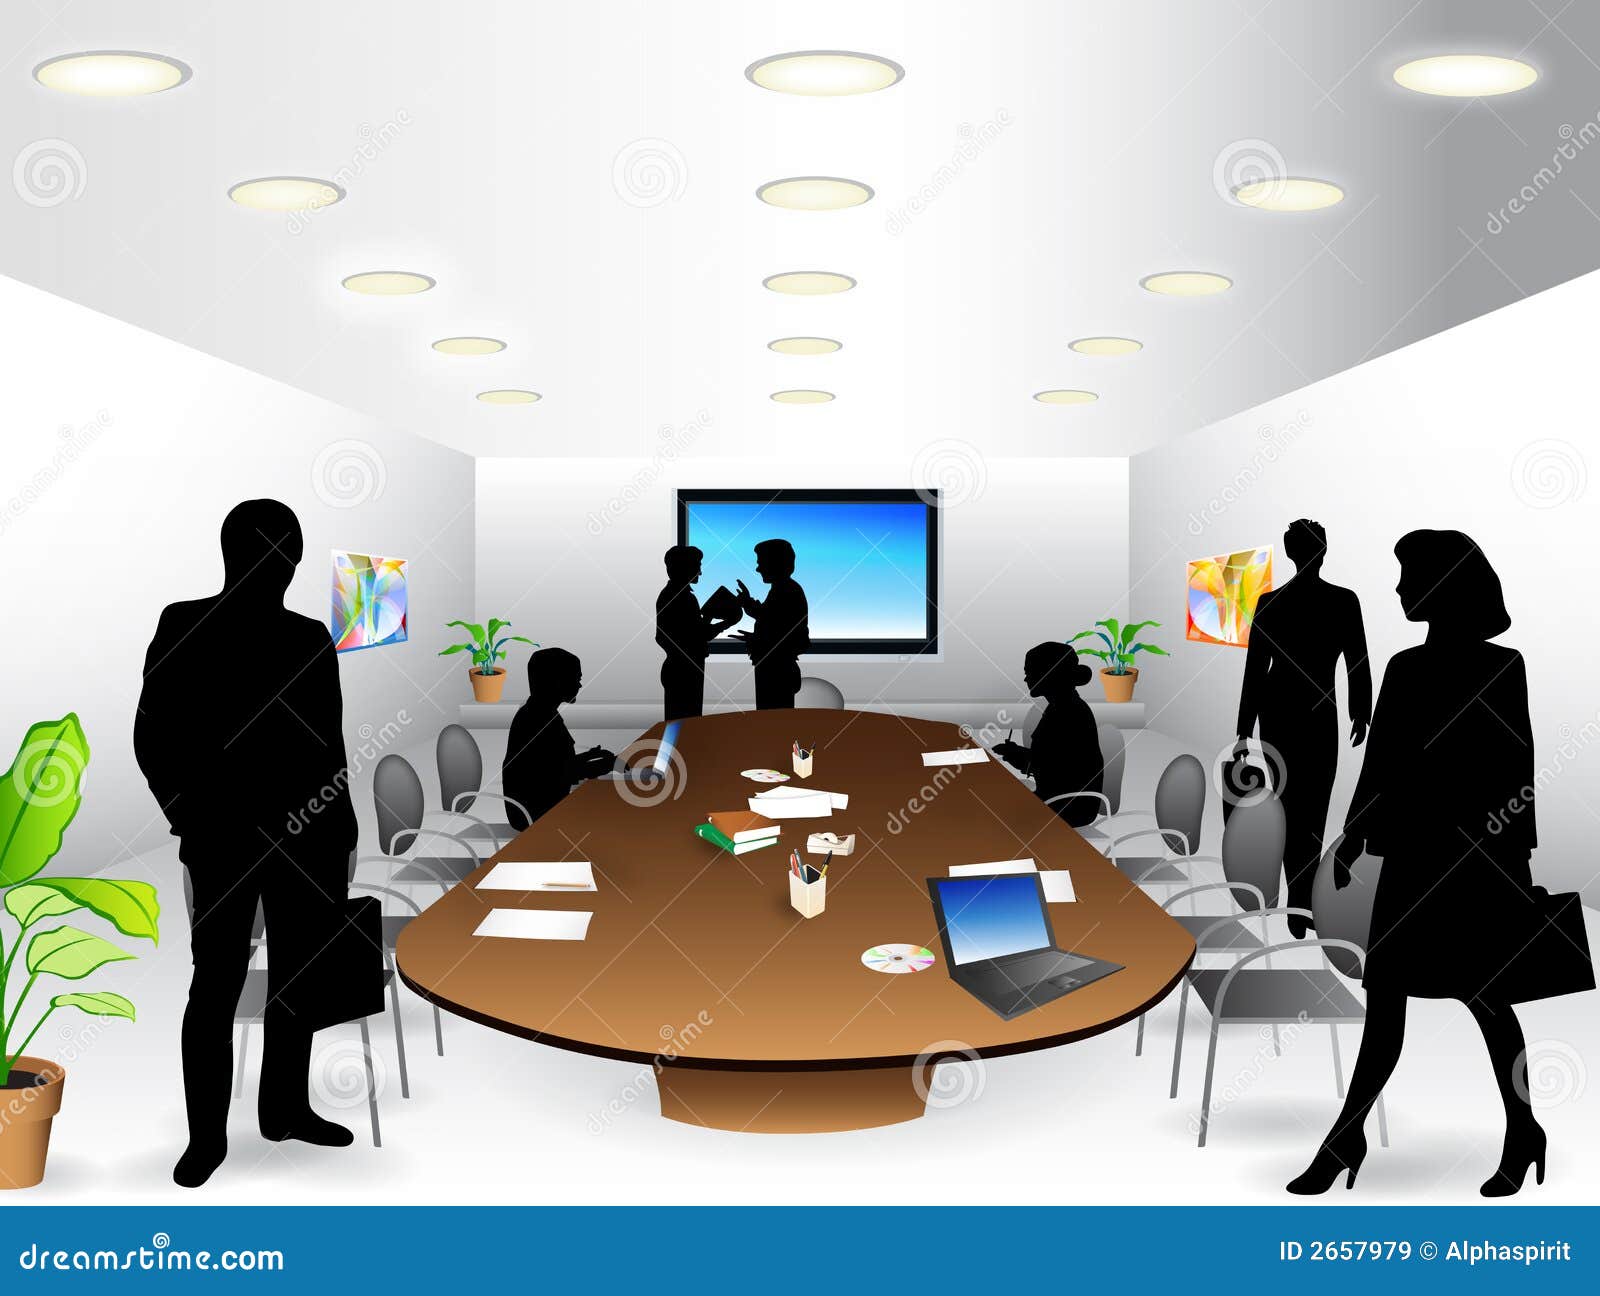 clipart business meeting - photo #21